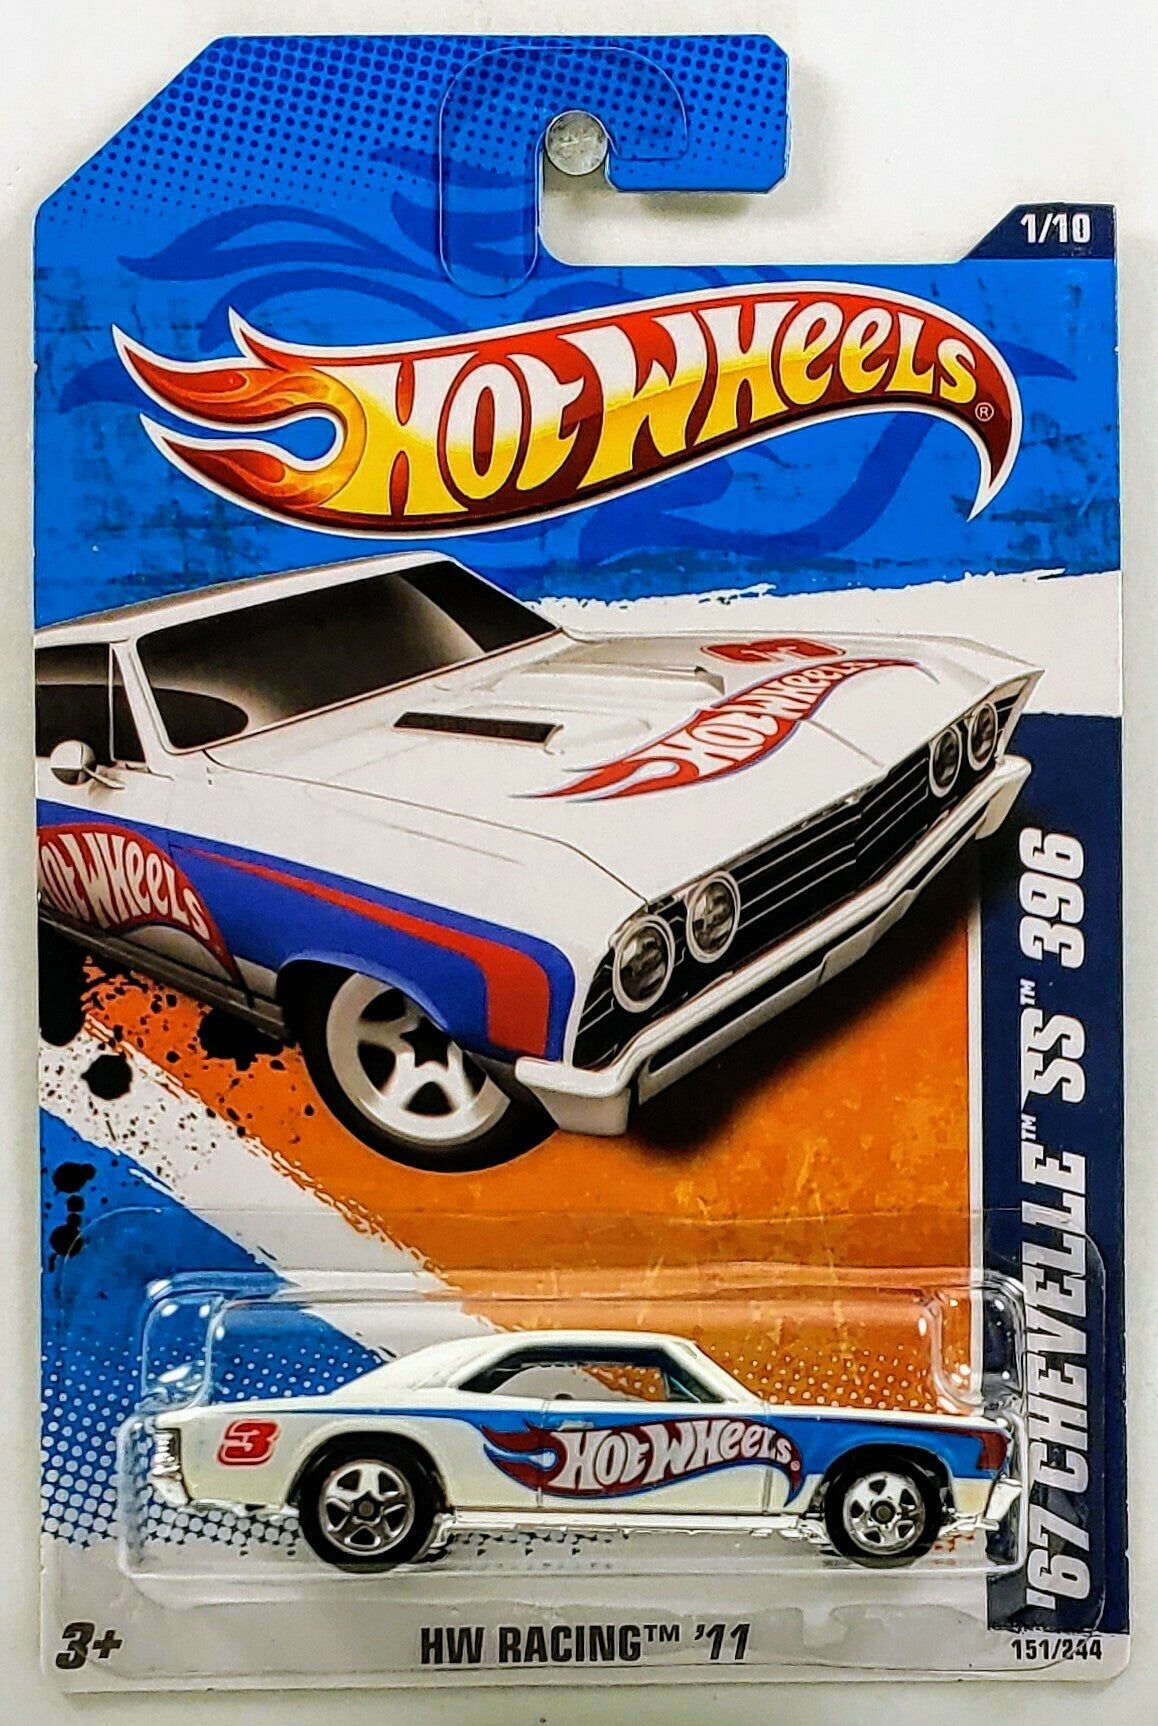 Hot Wheels 2011 - Collector # 151/244 - HW Racing 1/10 - '67 Chevelle SS 396 - White - USA